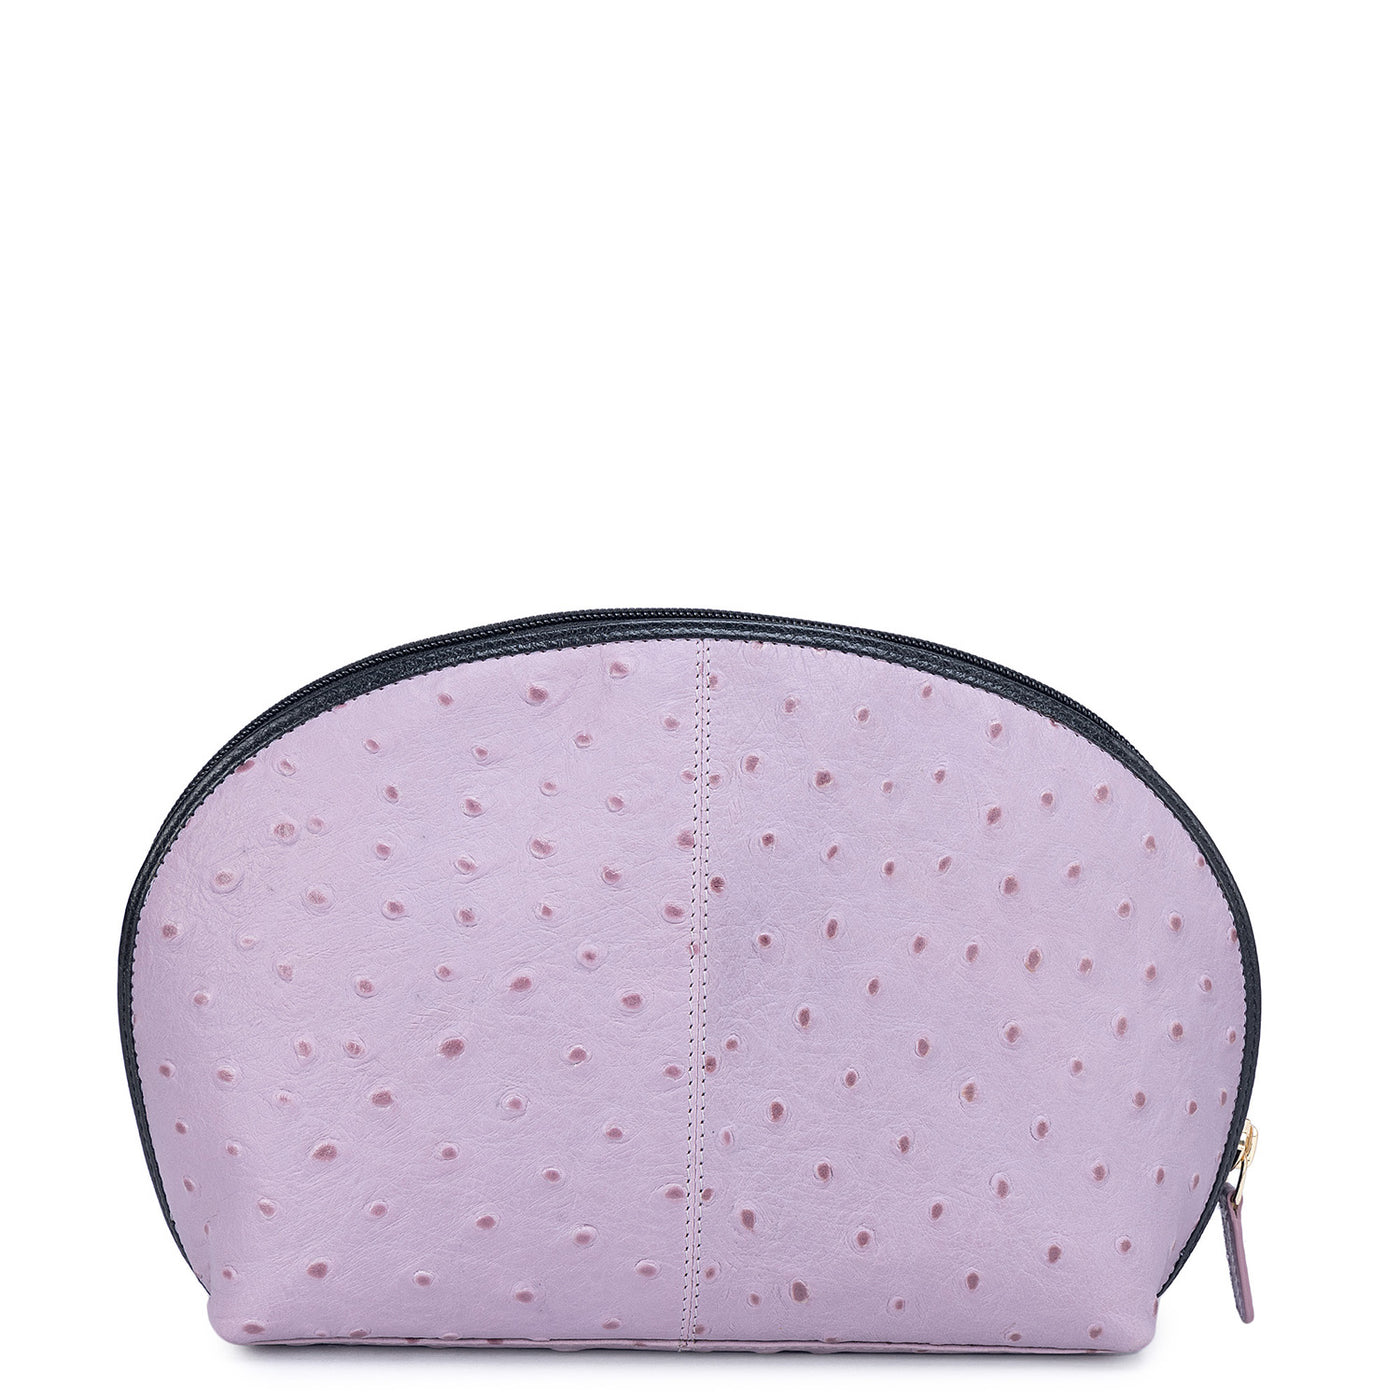 Ostrich Leather Vanity Pouch - Lavender